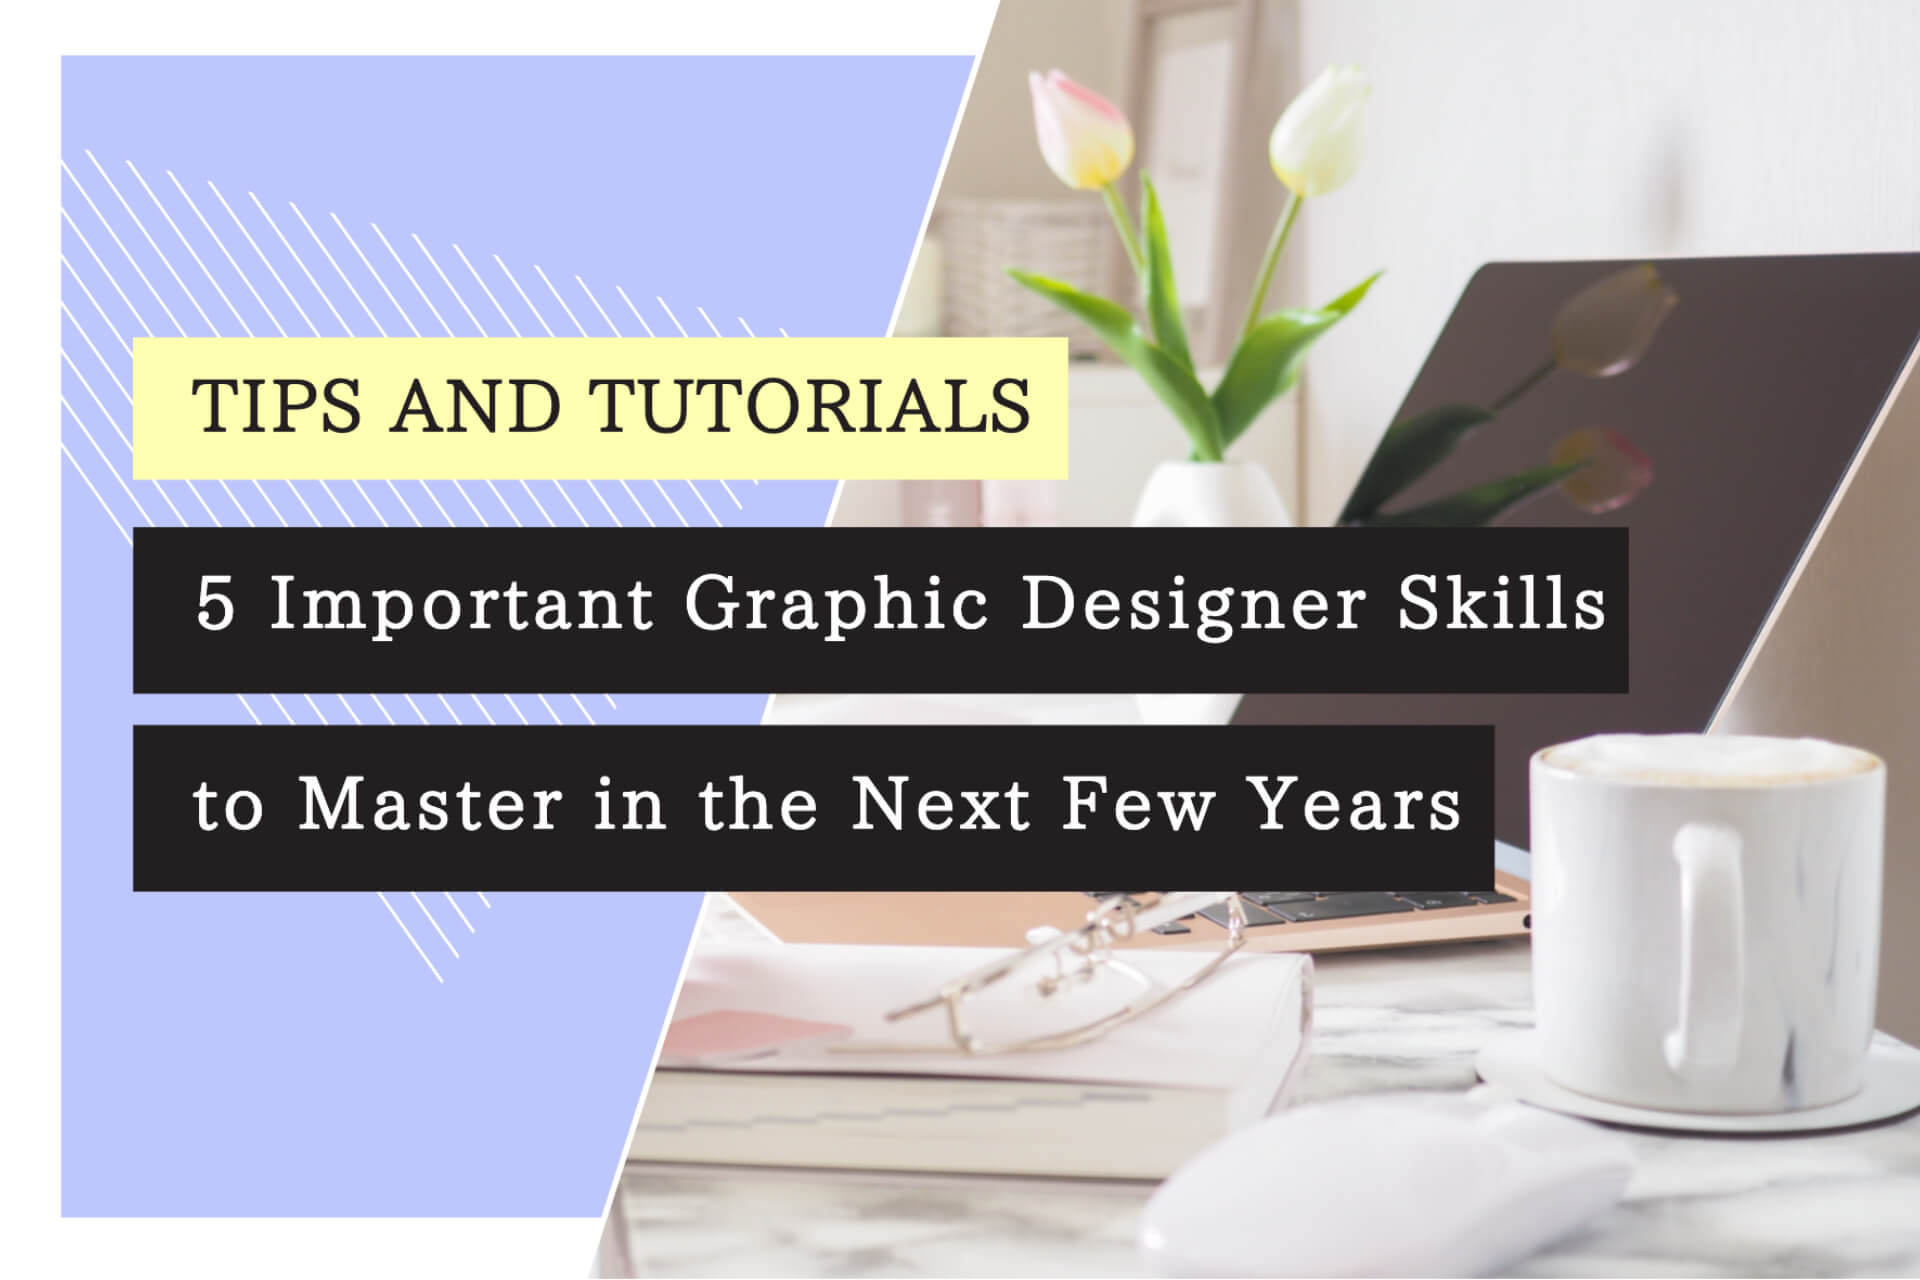 5 Important Graphic Designer Skills to Master in the Next Few Years